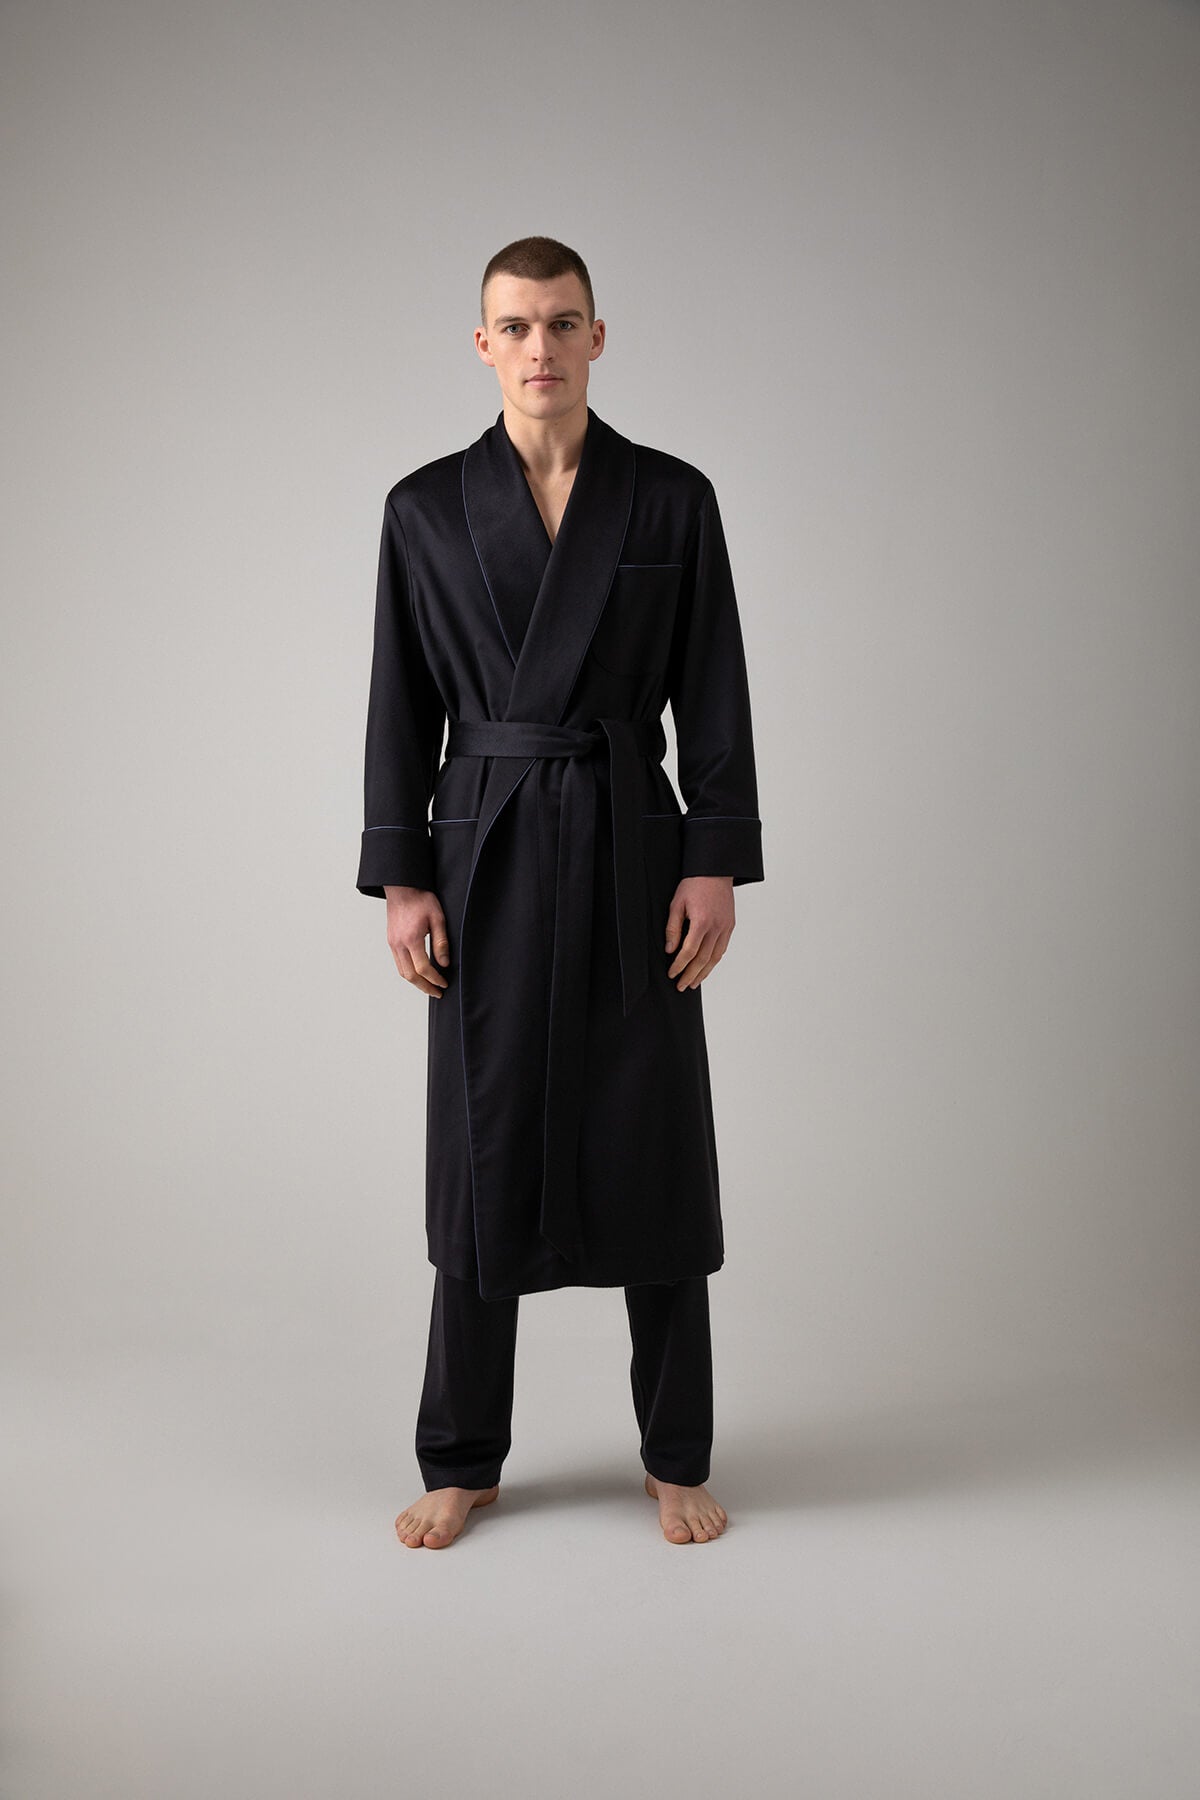 Men's Dressing Gowns for Sale – Tokyo Laundry